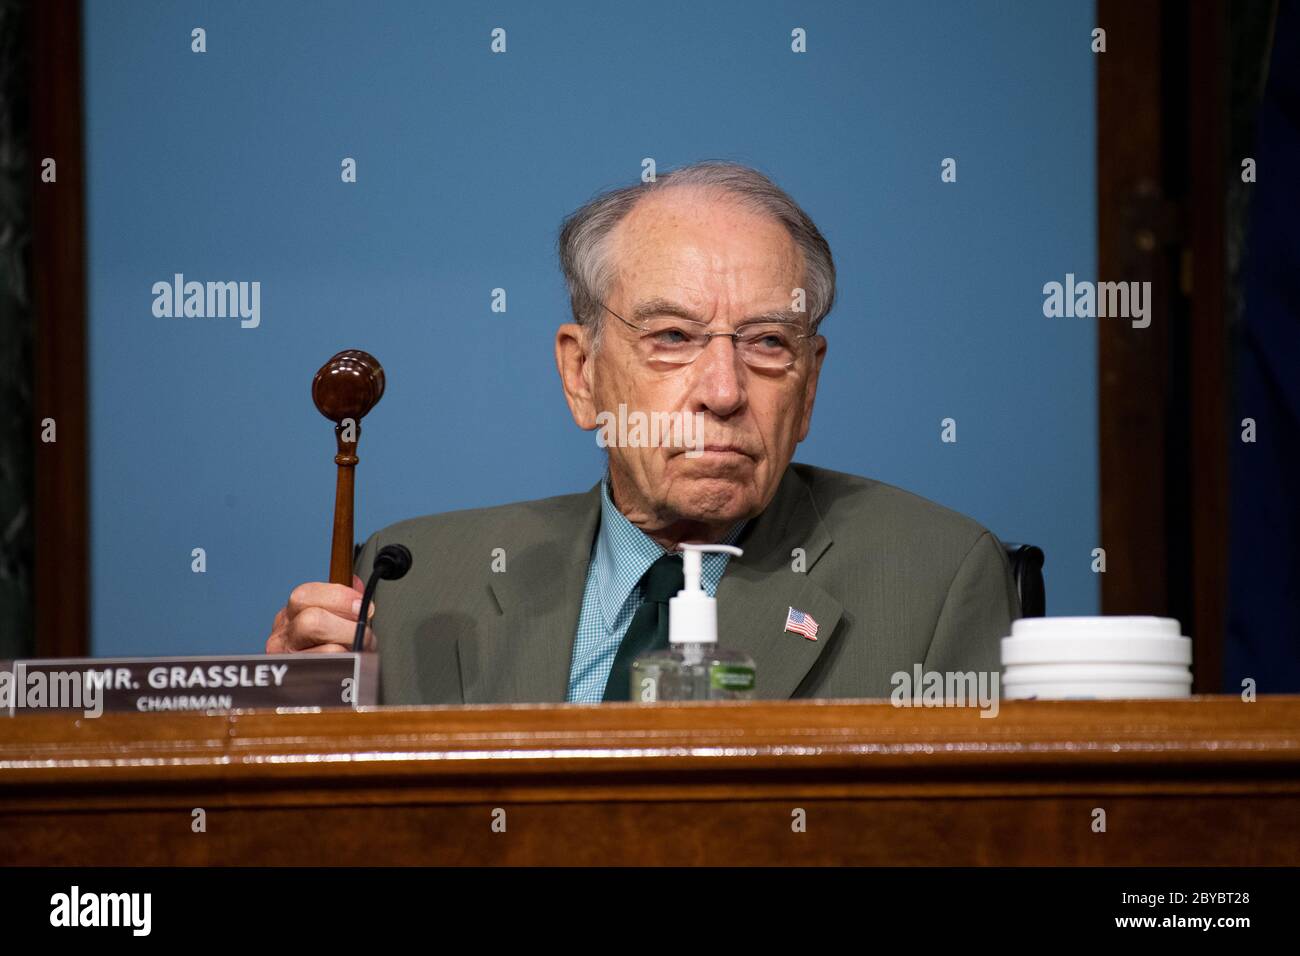 United States Senator Chuck Grassley (Republican of Iowa), Chairman, US Senate Committee on Finance, holds up a gavel during a hearing on “COVID-19/Unemployment Insurance” on Capitol Hill in Washington on Tuesday, June 9, 2020. Credit: Caroline Brehman/Pool via CNP /MediaPunch Stock Photo